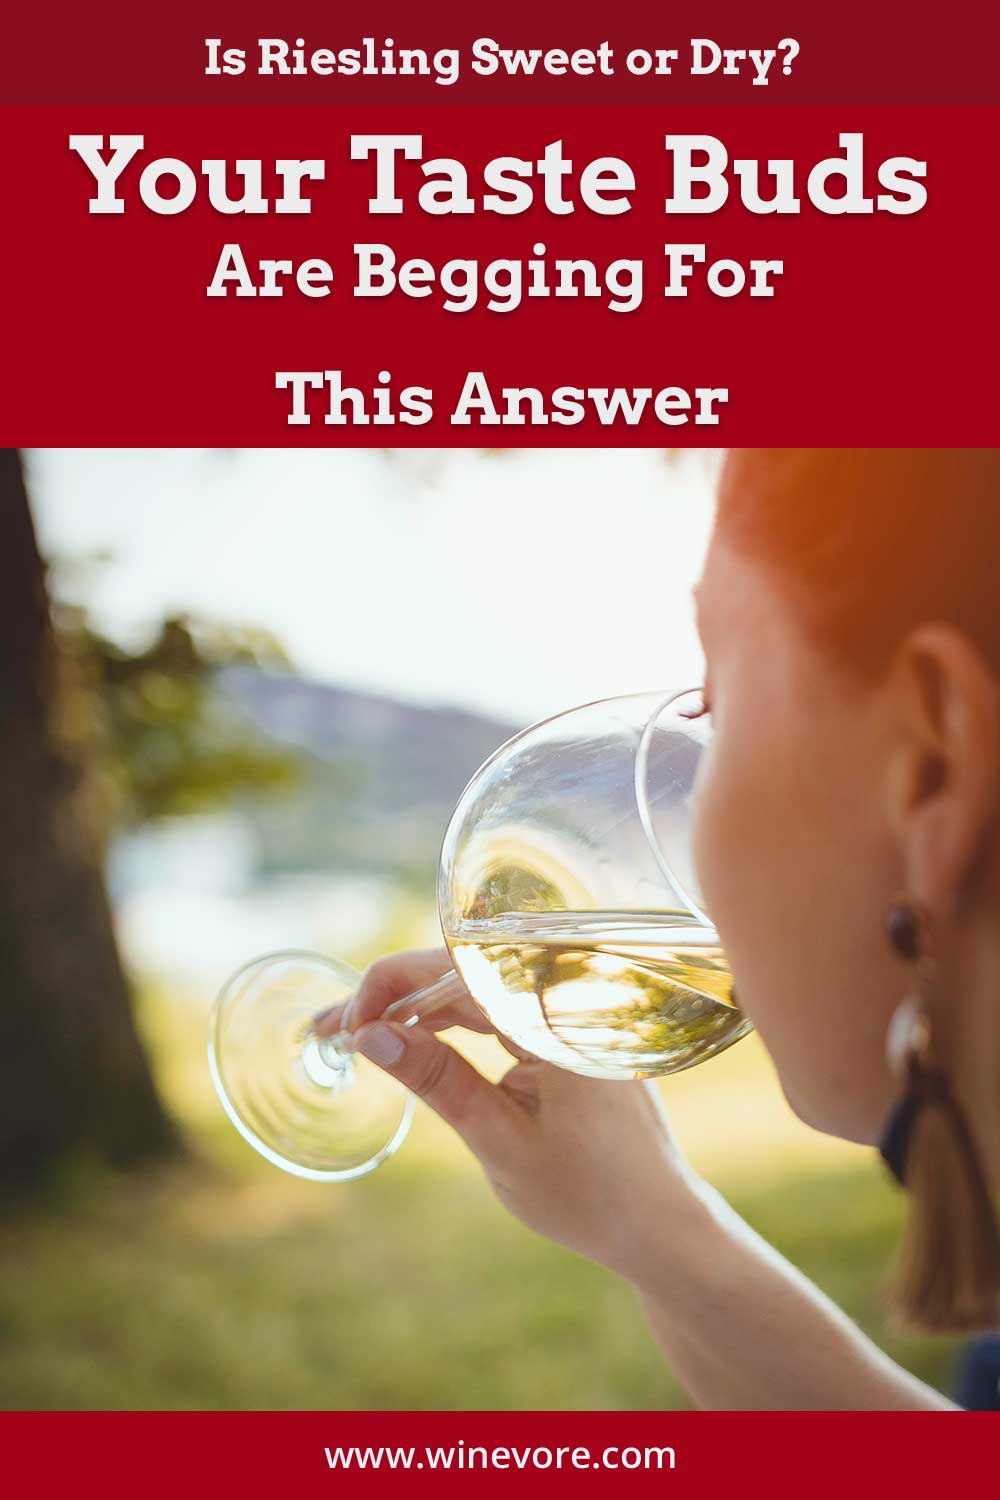 Woman drinking wine outdoors - Is Riesling Sweet or Dry?